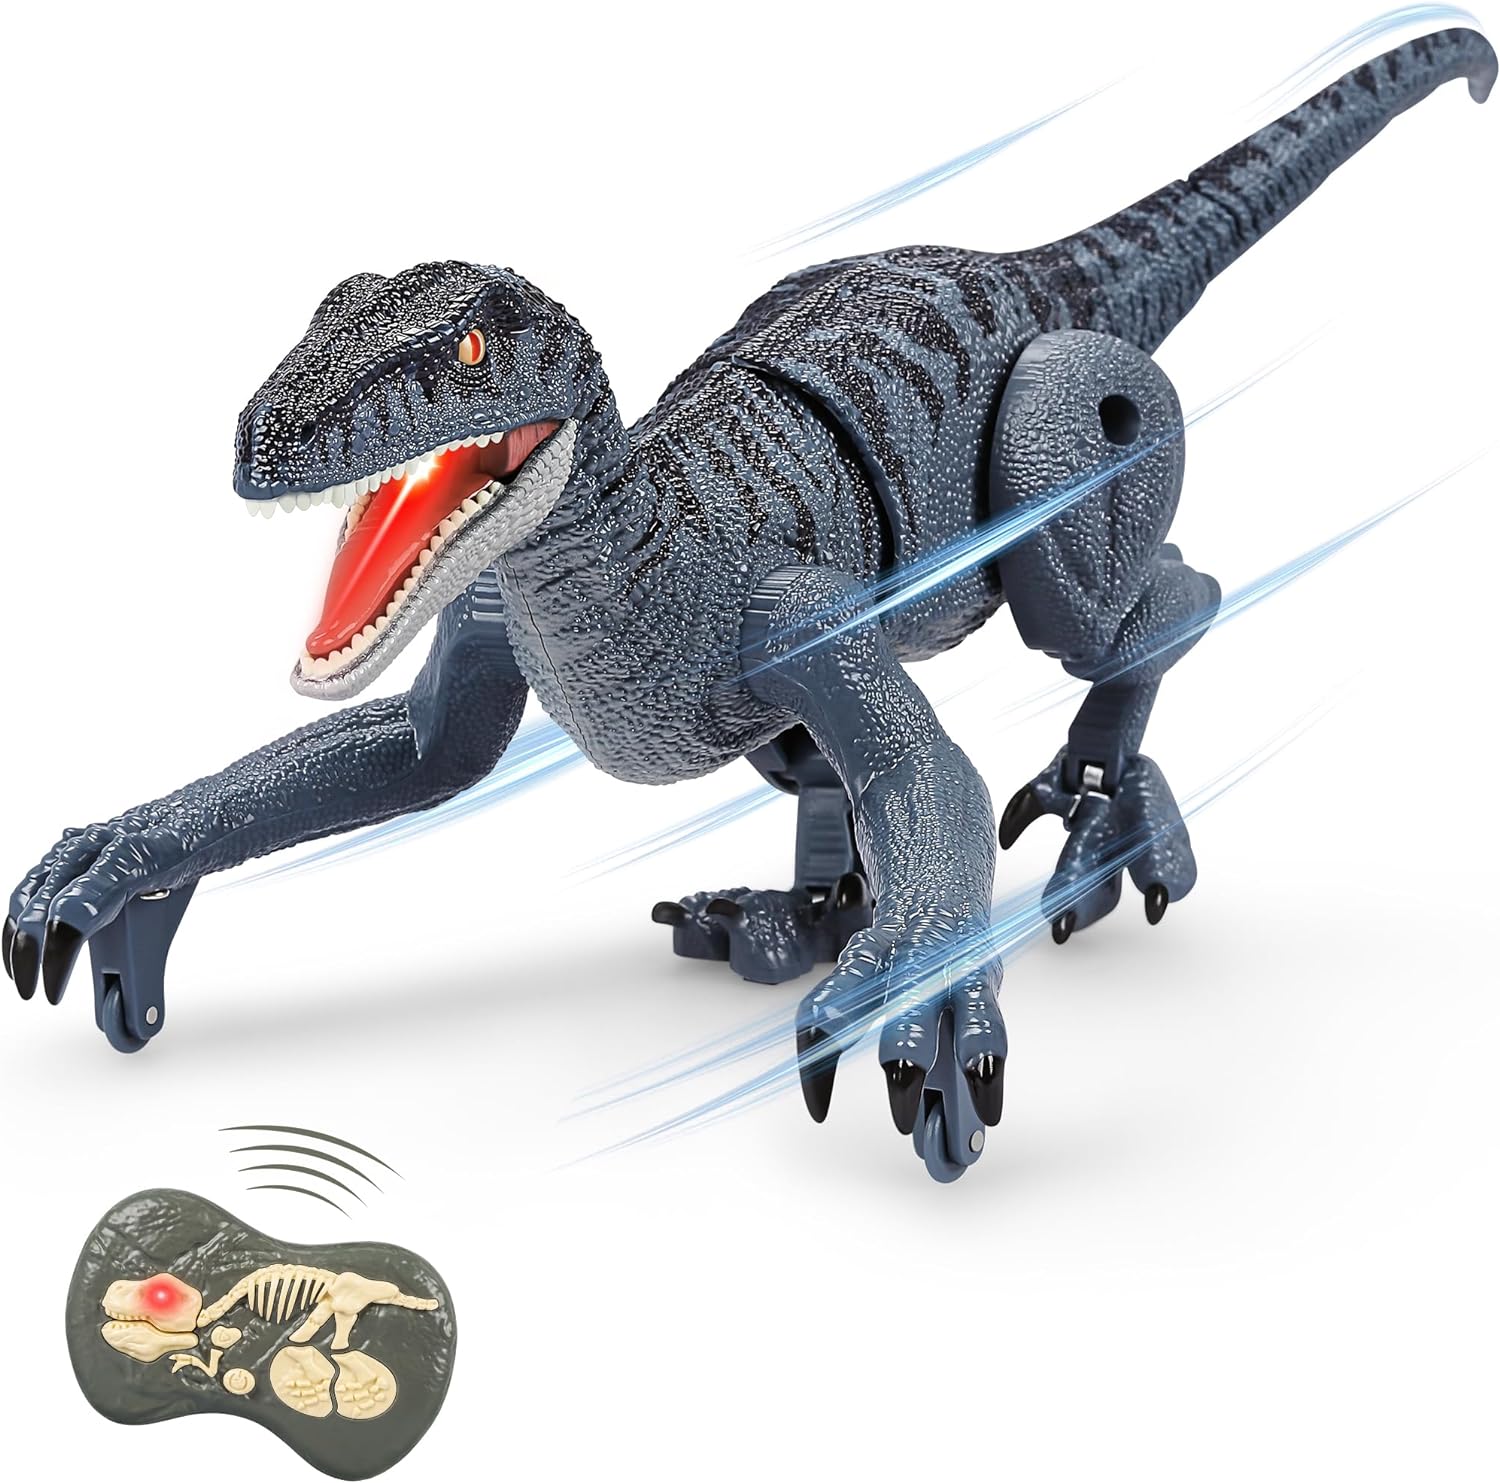 Read more about the article CUKU Remote Control Dinosaur Review